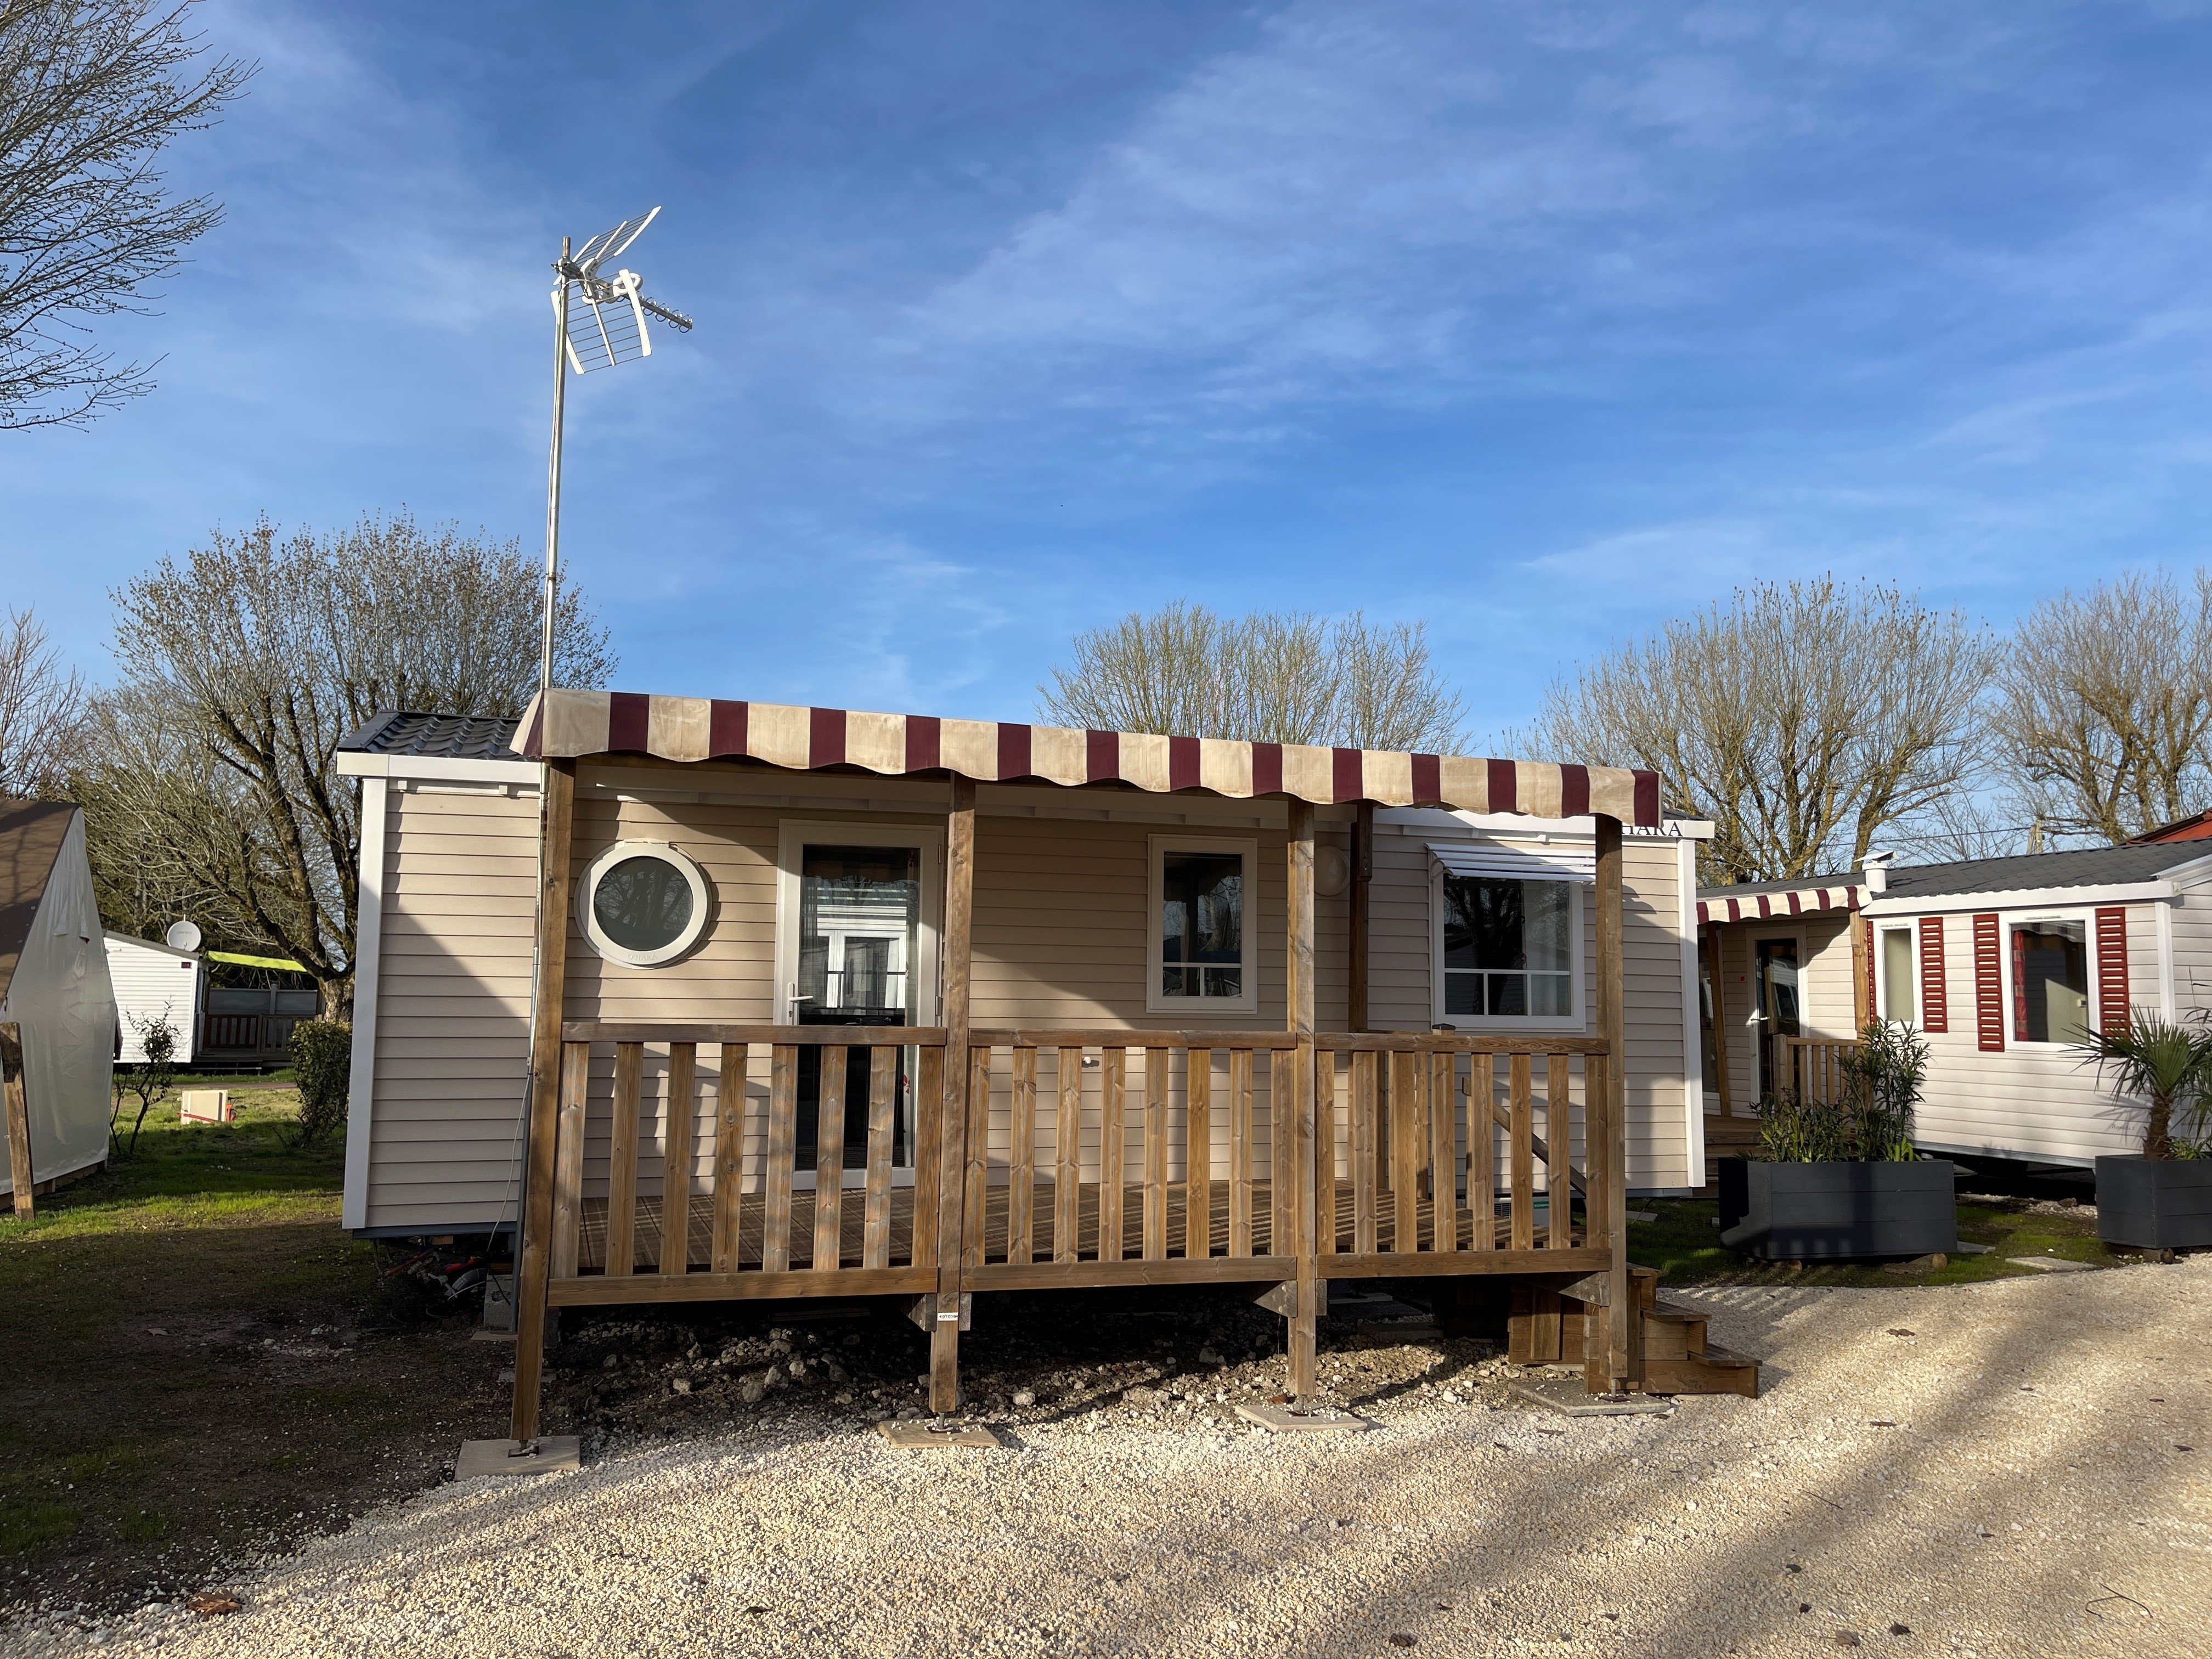 Mobile-home 32m2 - 3 chambres - CLIMATISATION - terrasse couverte 12m2